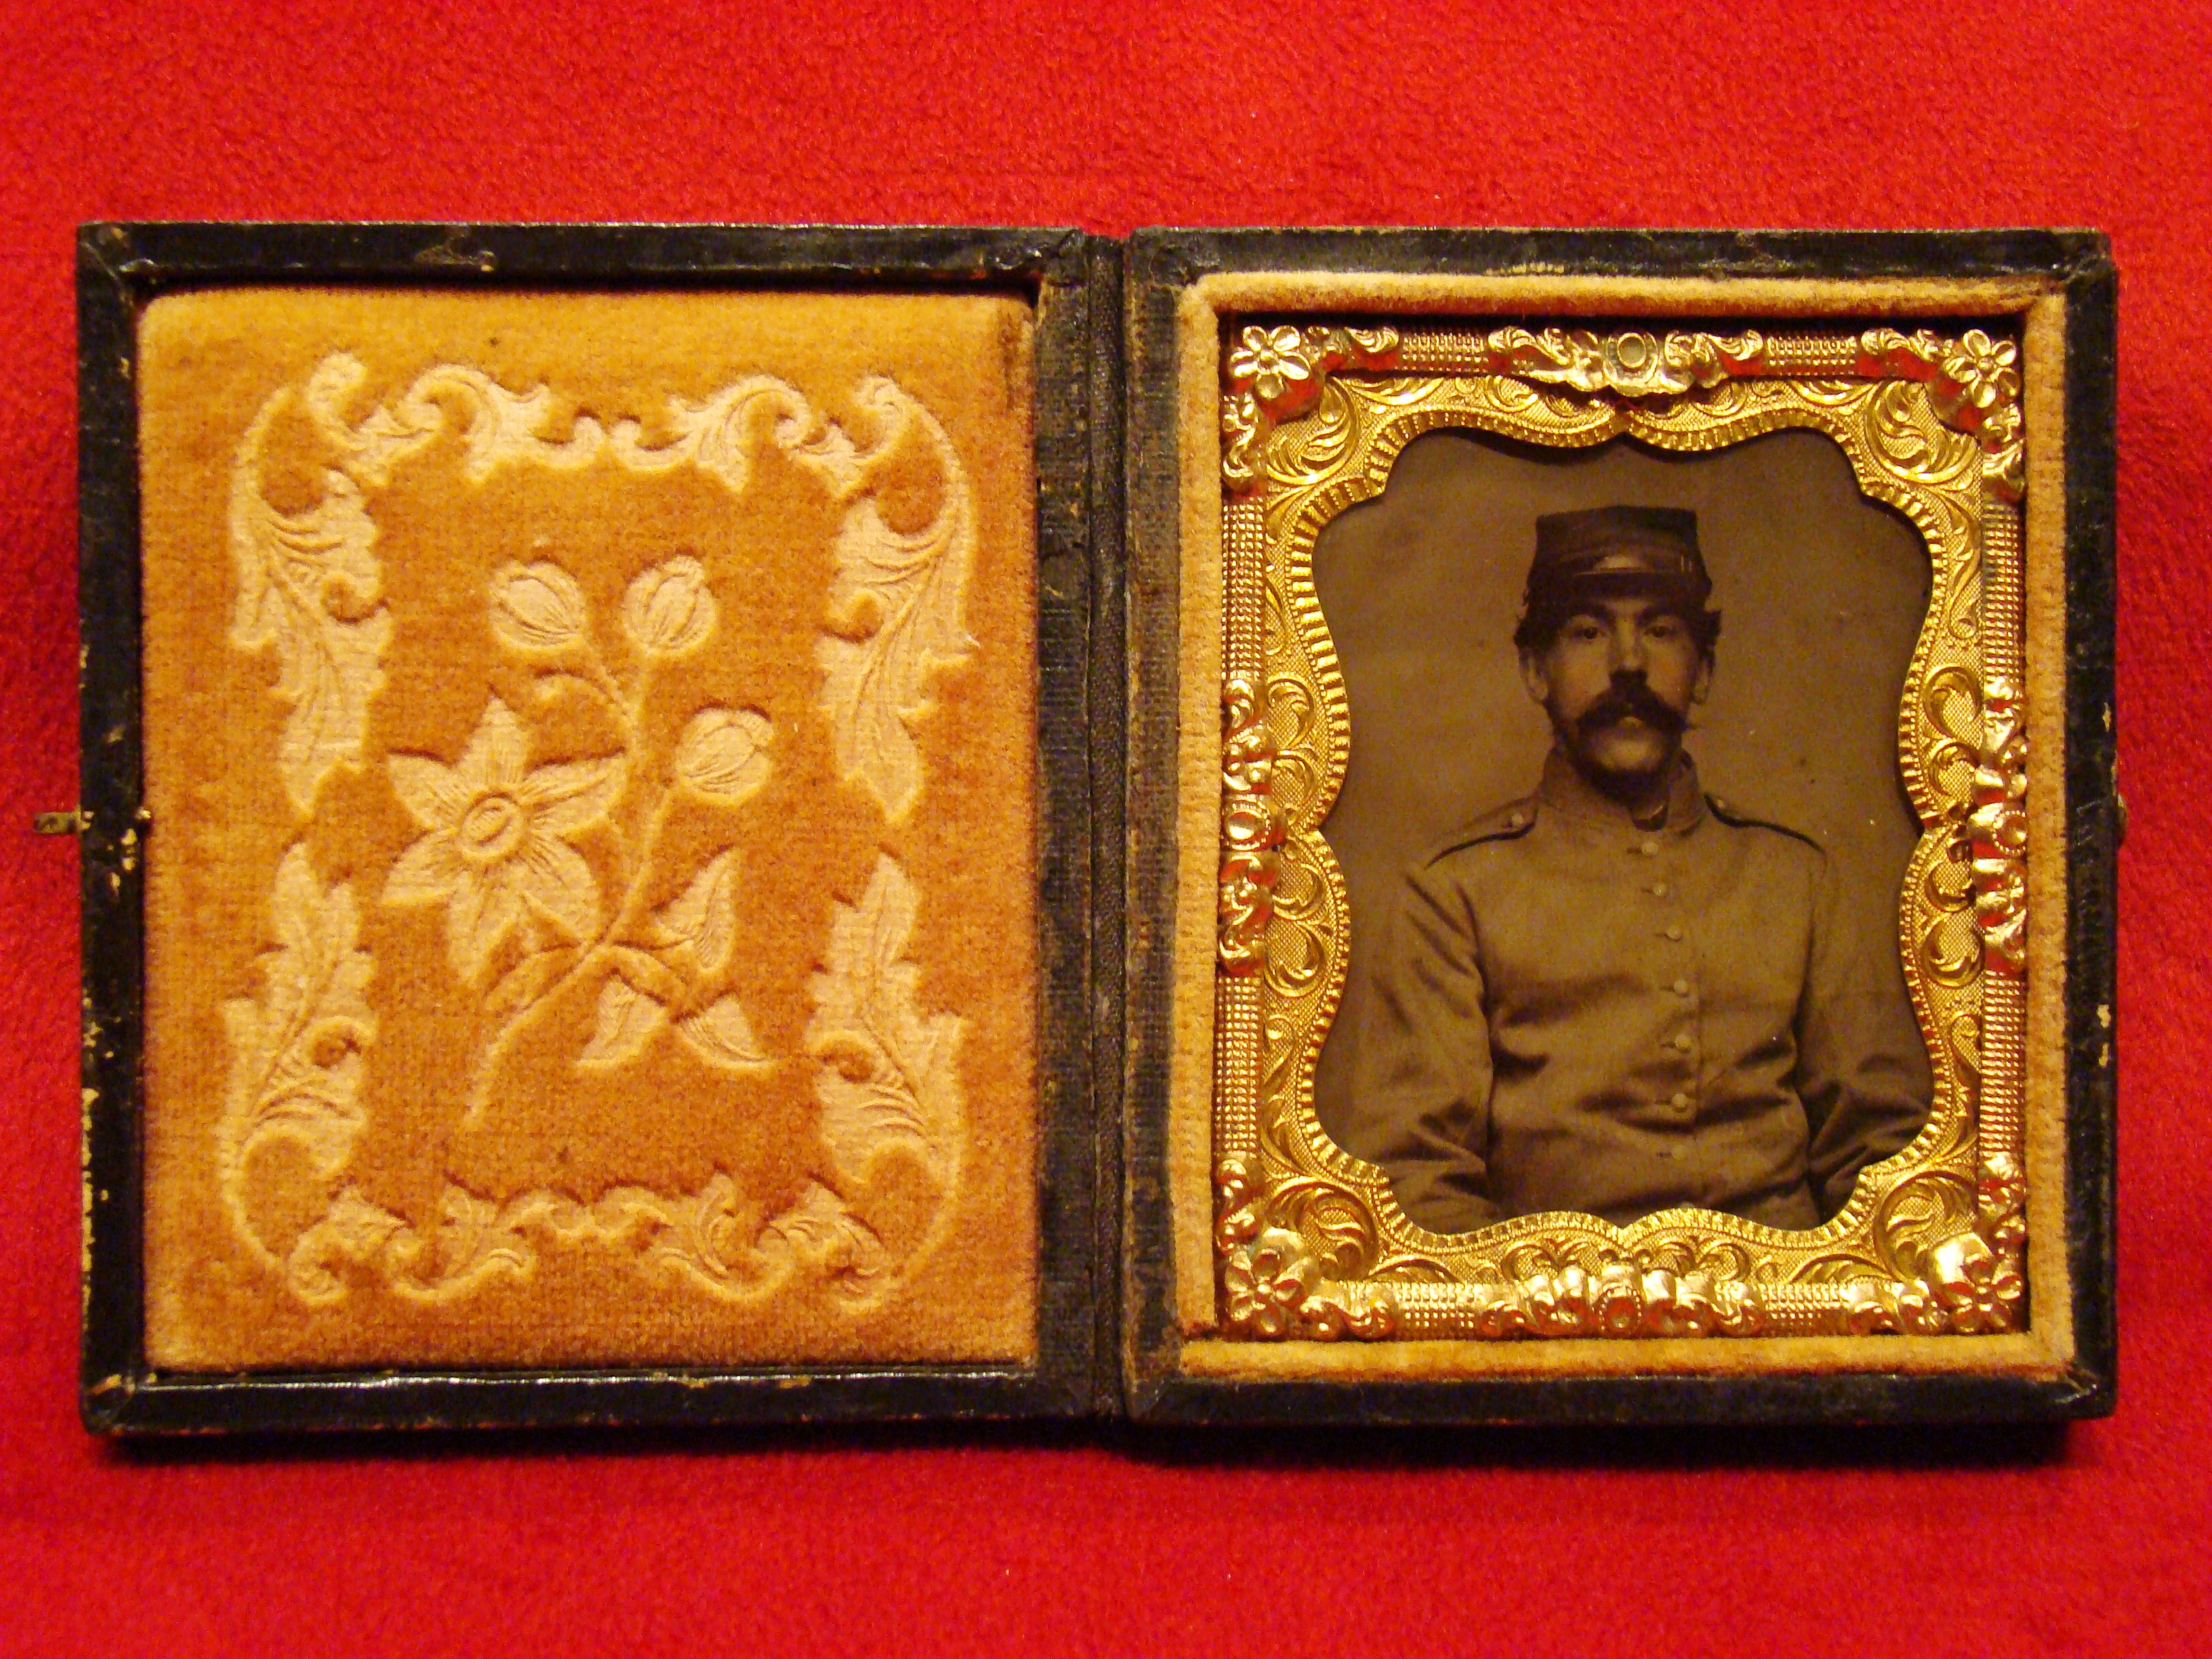 Union Buckles and Plates - Army of Tennessee Relics